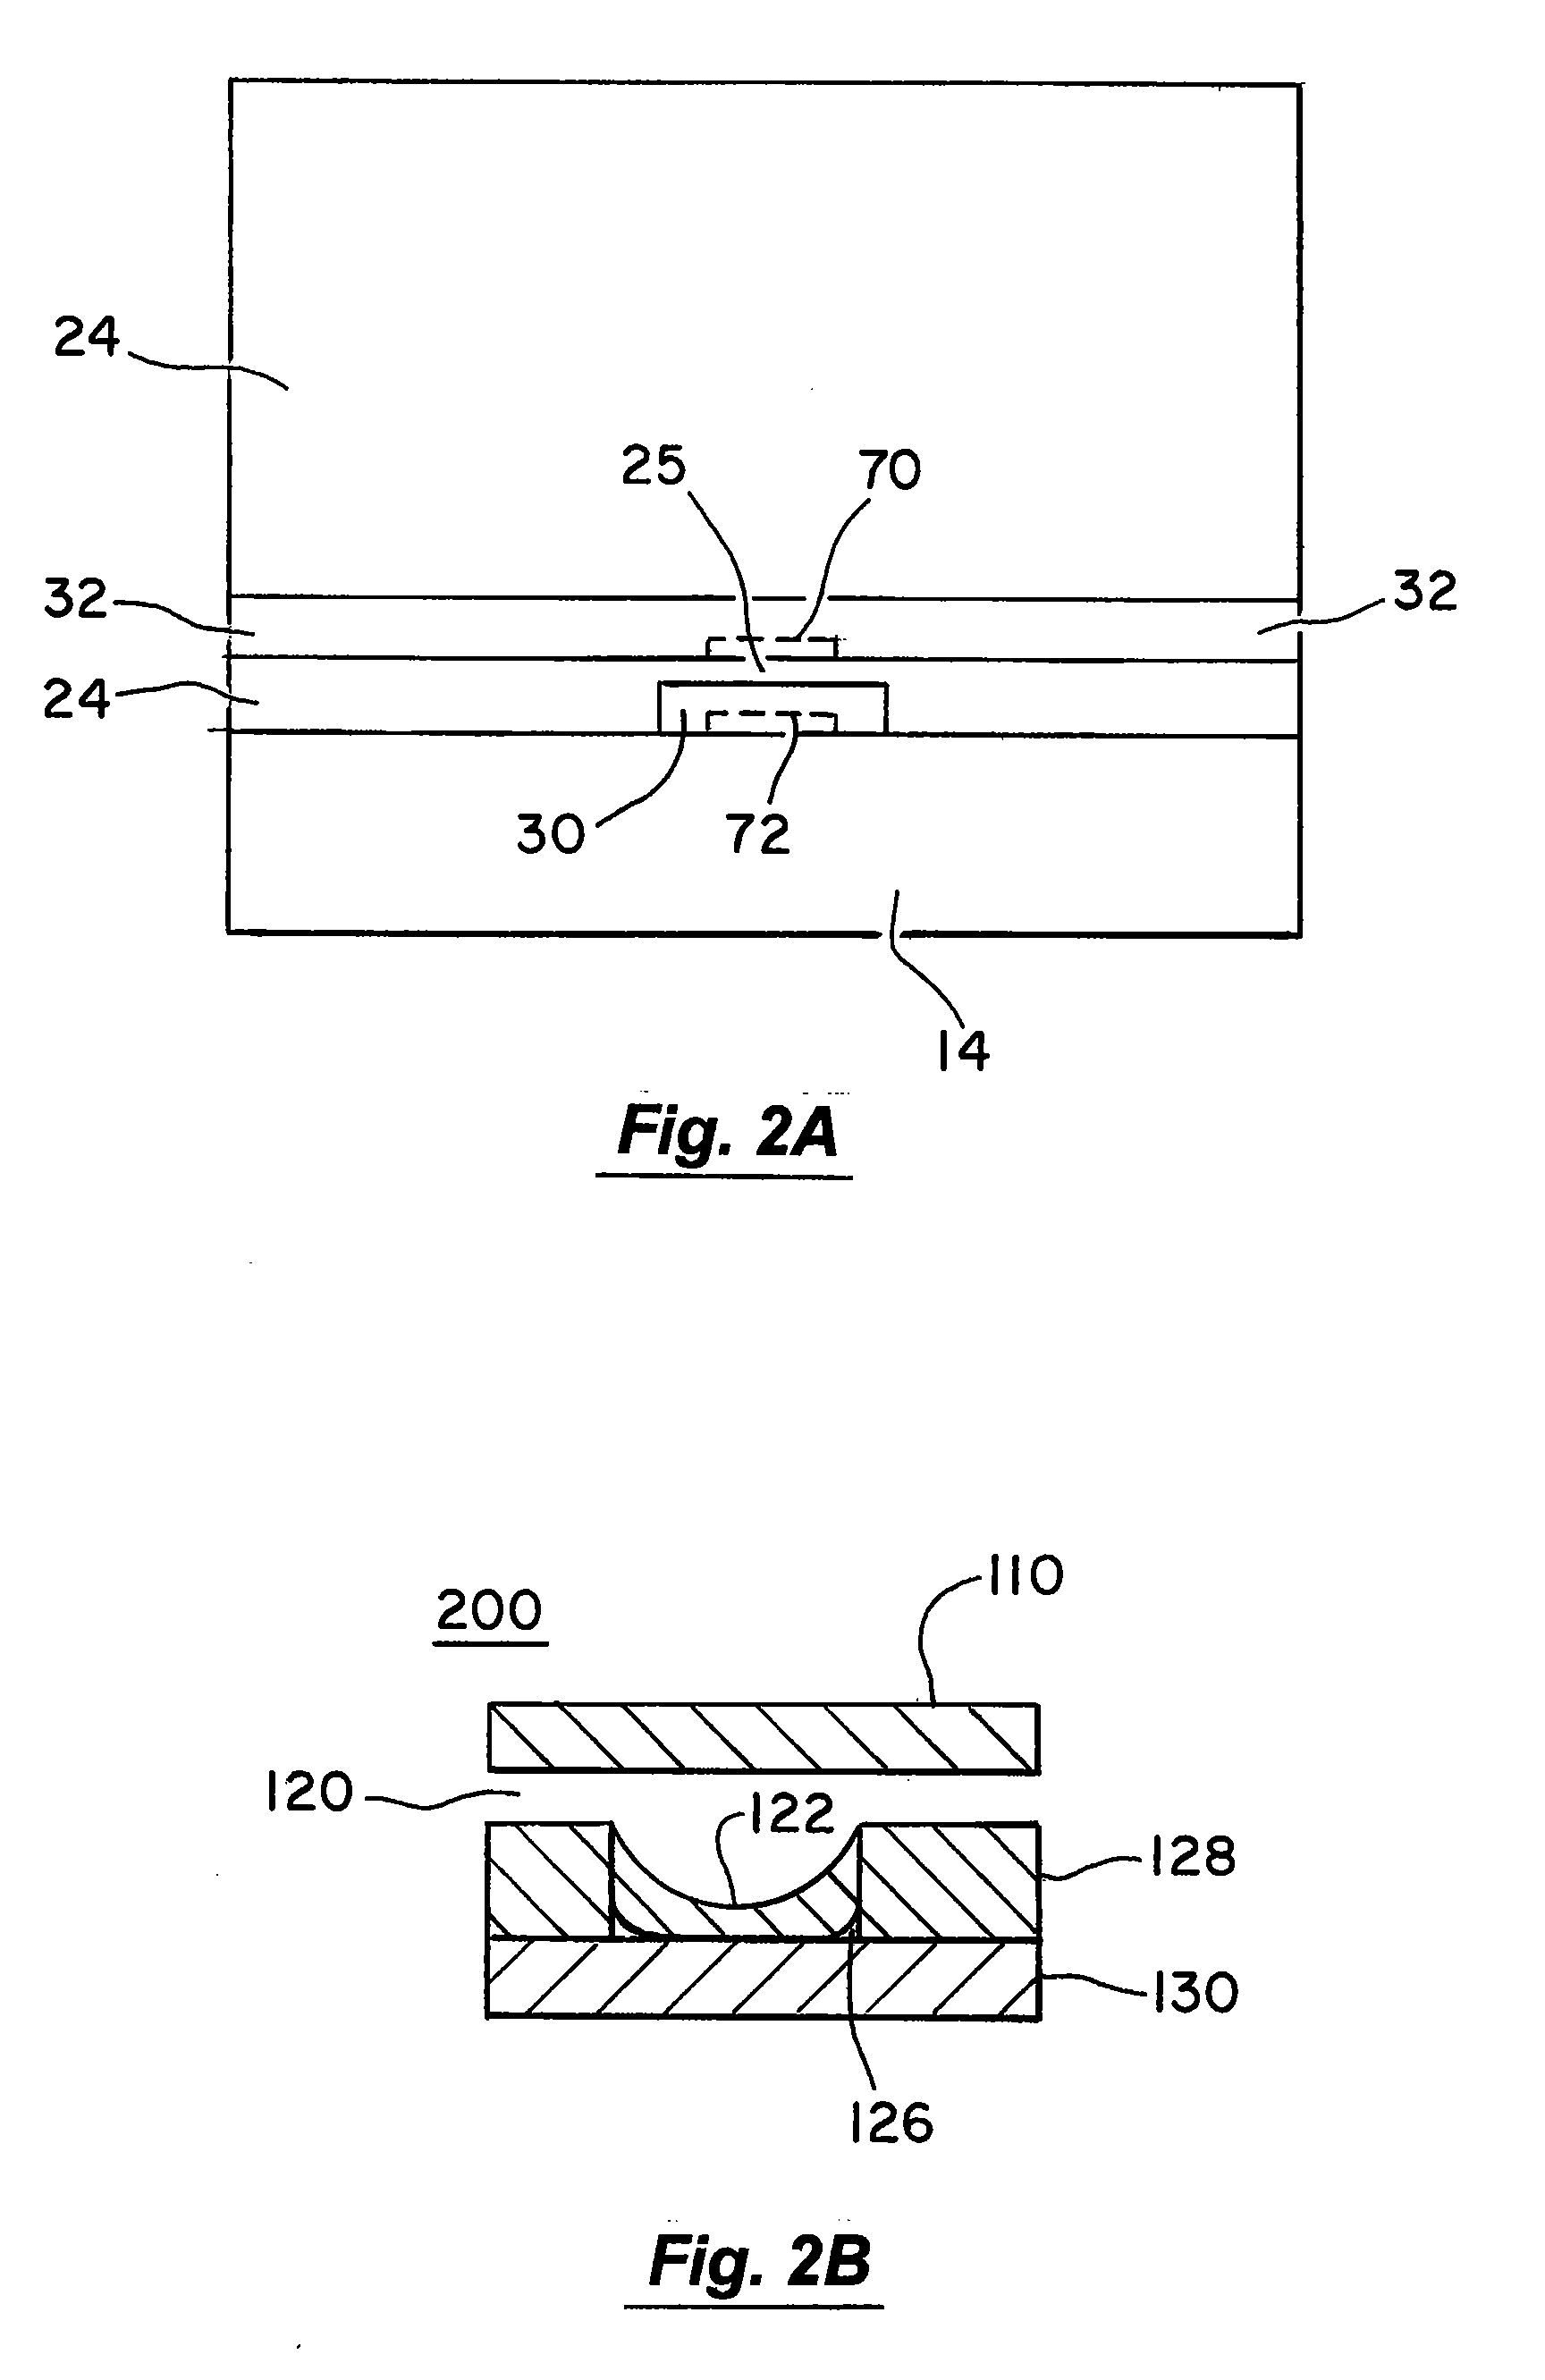 Apparatus and methods for conducting assays and high throughput screening